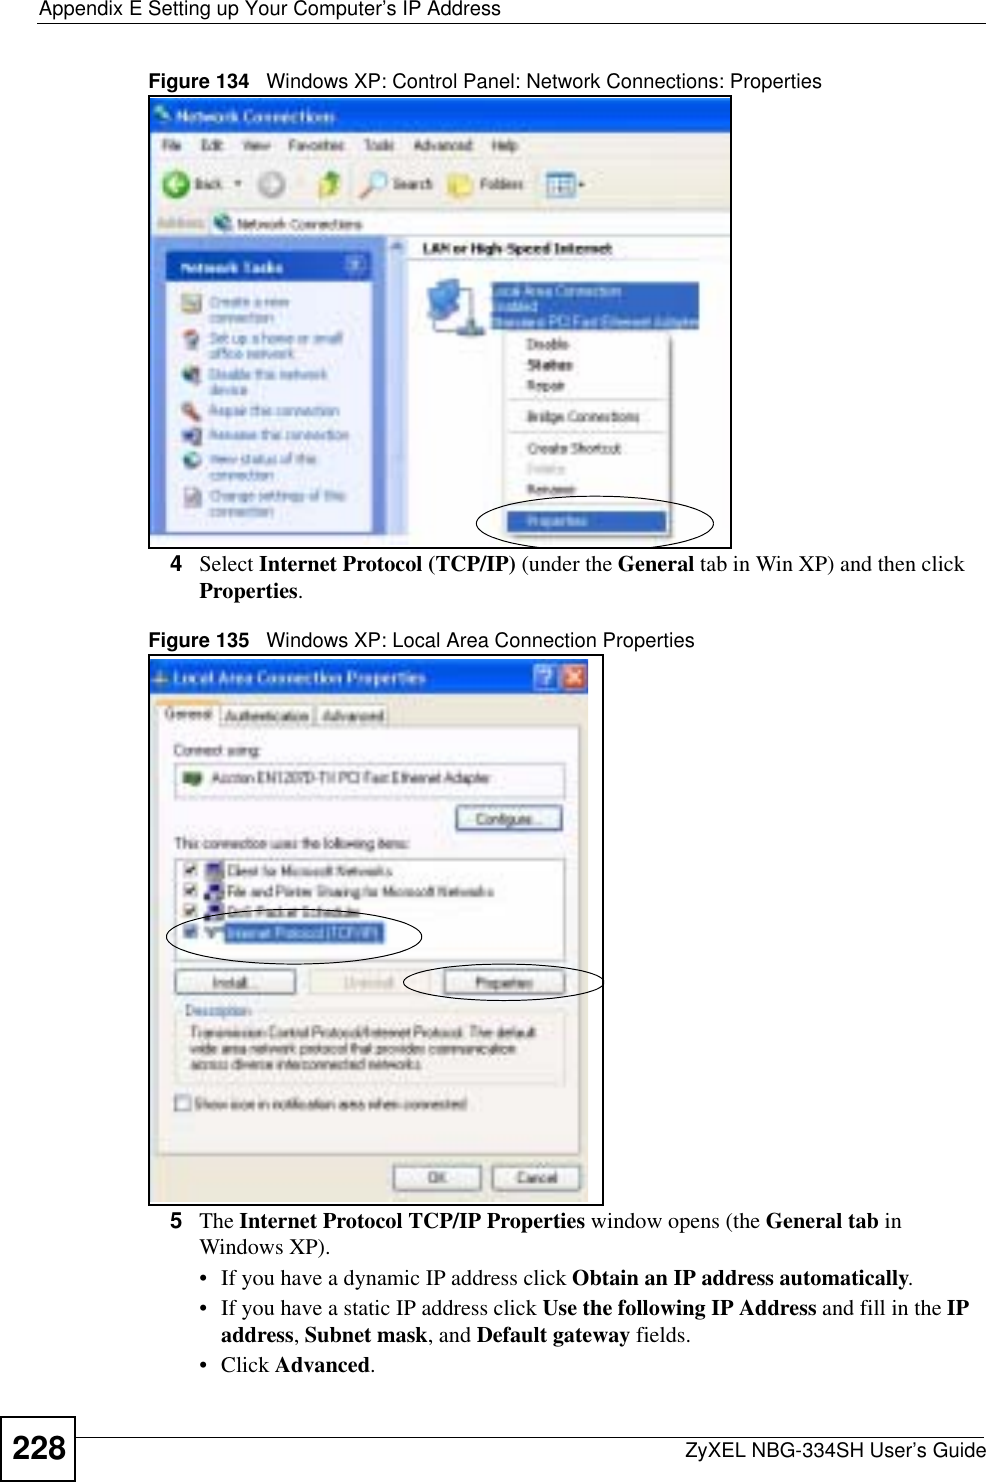 Appendix E Setting up Your Computer’s IP AddressZyXEL NBG-334SH User’s Guide228Figure 134   Windows XP: Control Panel: Network Connections: Properties4Select Internet Protocol (TCP/IP) (under the General tab in Win XP) and then click Properties.Figure 135   Windows XP: Local Area Connection Properties5The Internet Protocol TCP/IP Properties window opens (the General tab in Windows XP).• If you have a dynamic IP address click Obtain an IP address automatically.• If you have a static IP address click Use the following IP Address and fill in the IPaddress,Subnet mask, and Default gateway fields. • Click Advanced.